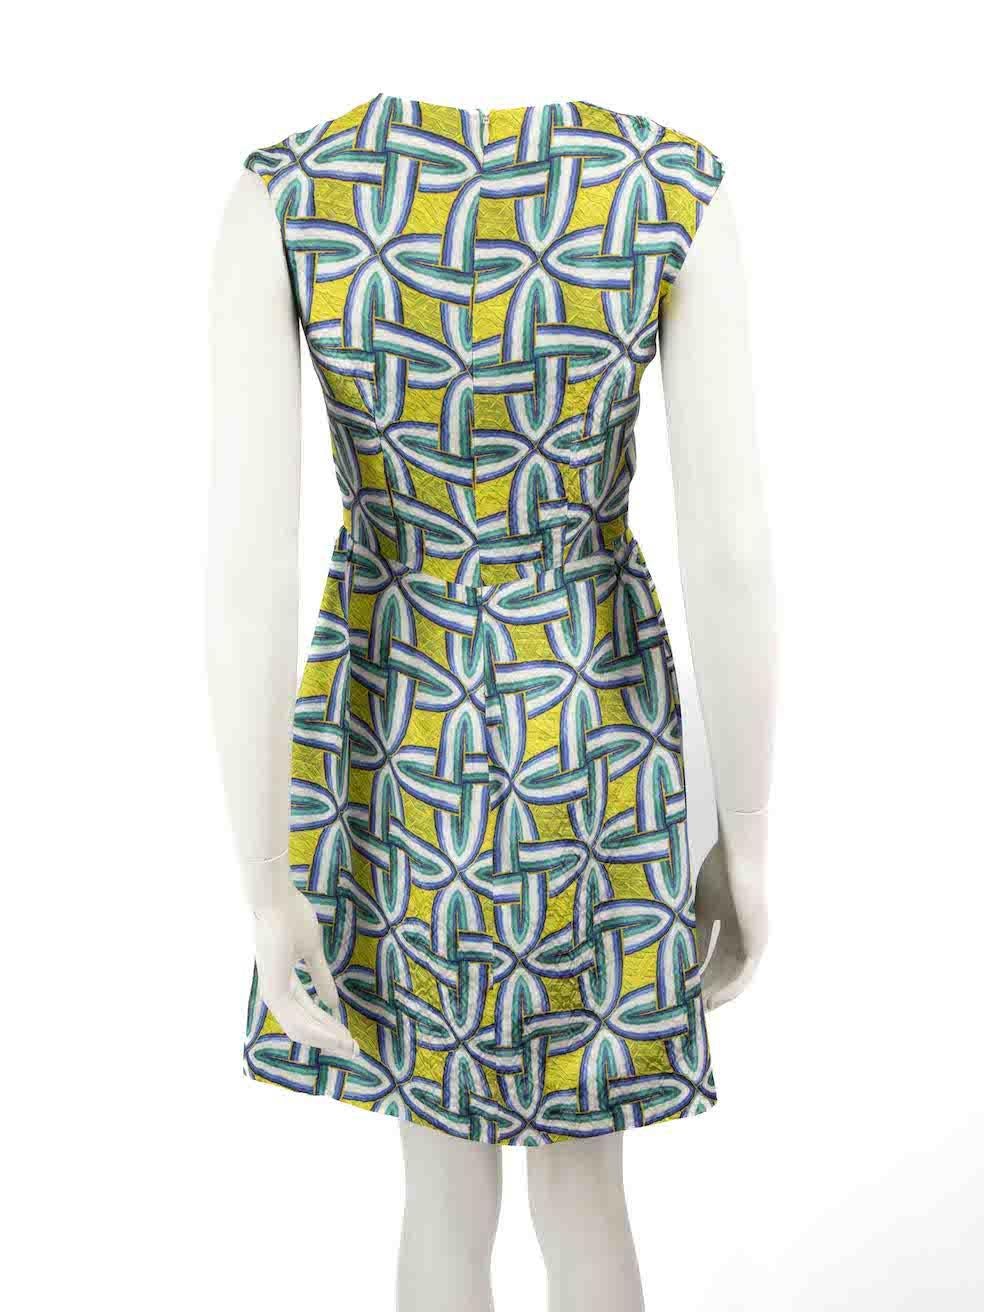 Peter Pilotto Abstract Pattern Sleeveless Mini Dress Size S In Excellent Condition For Sale In London, GB